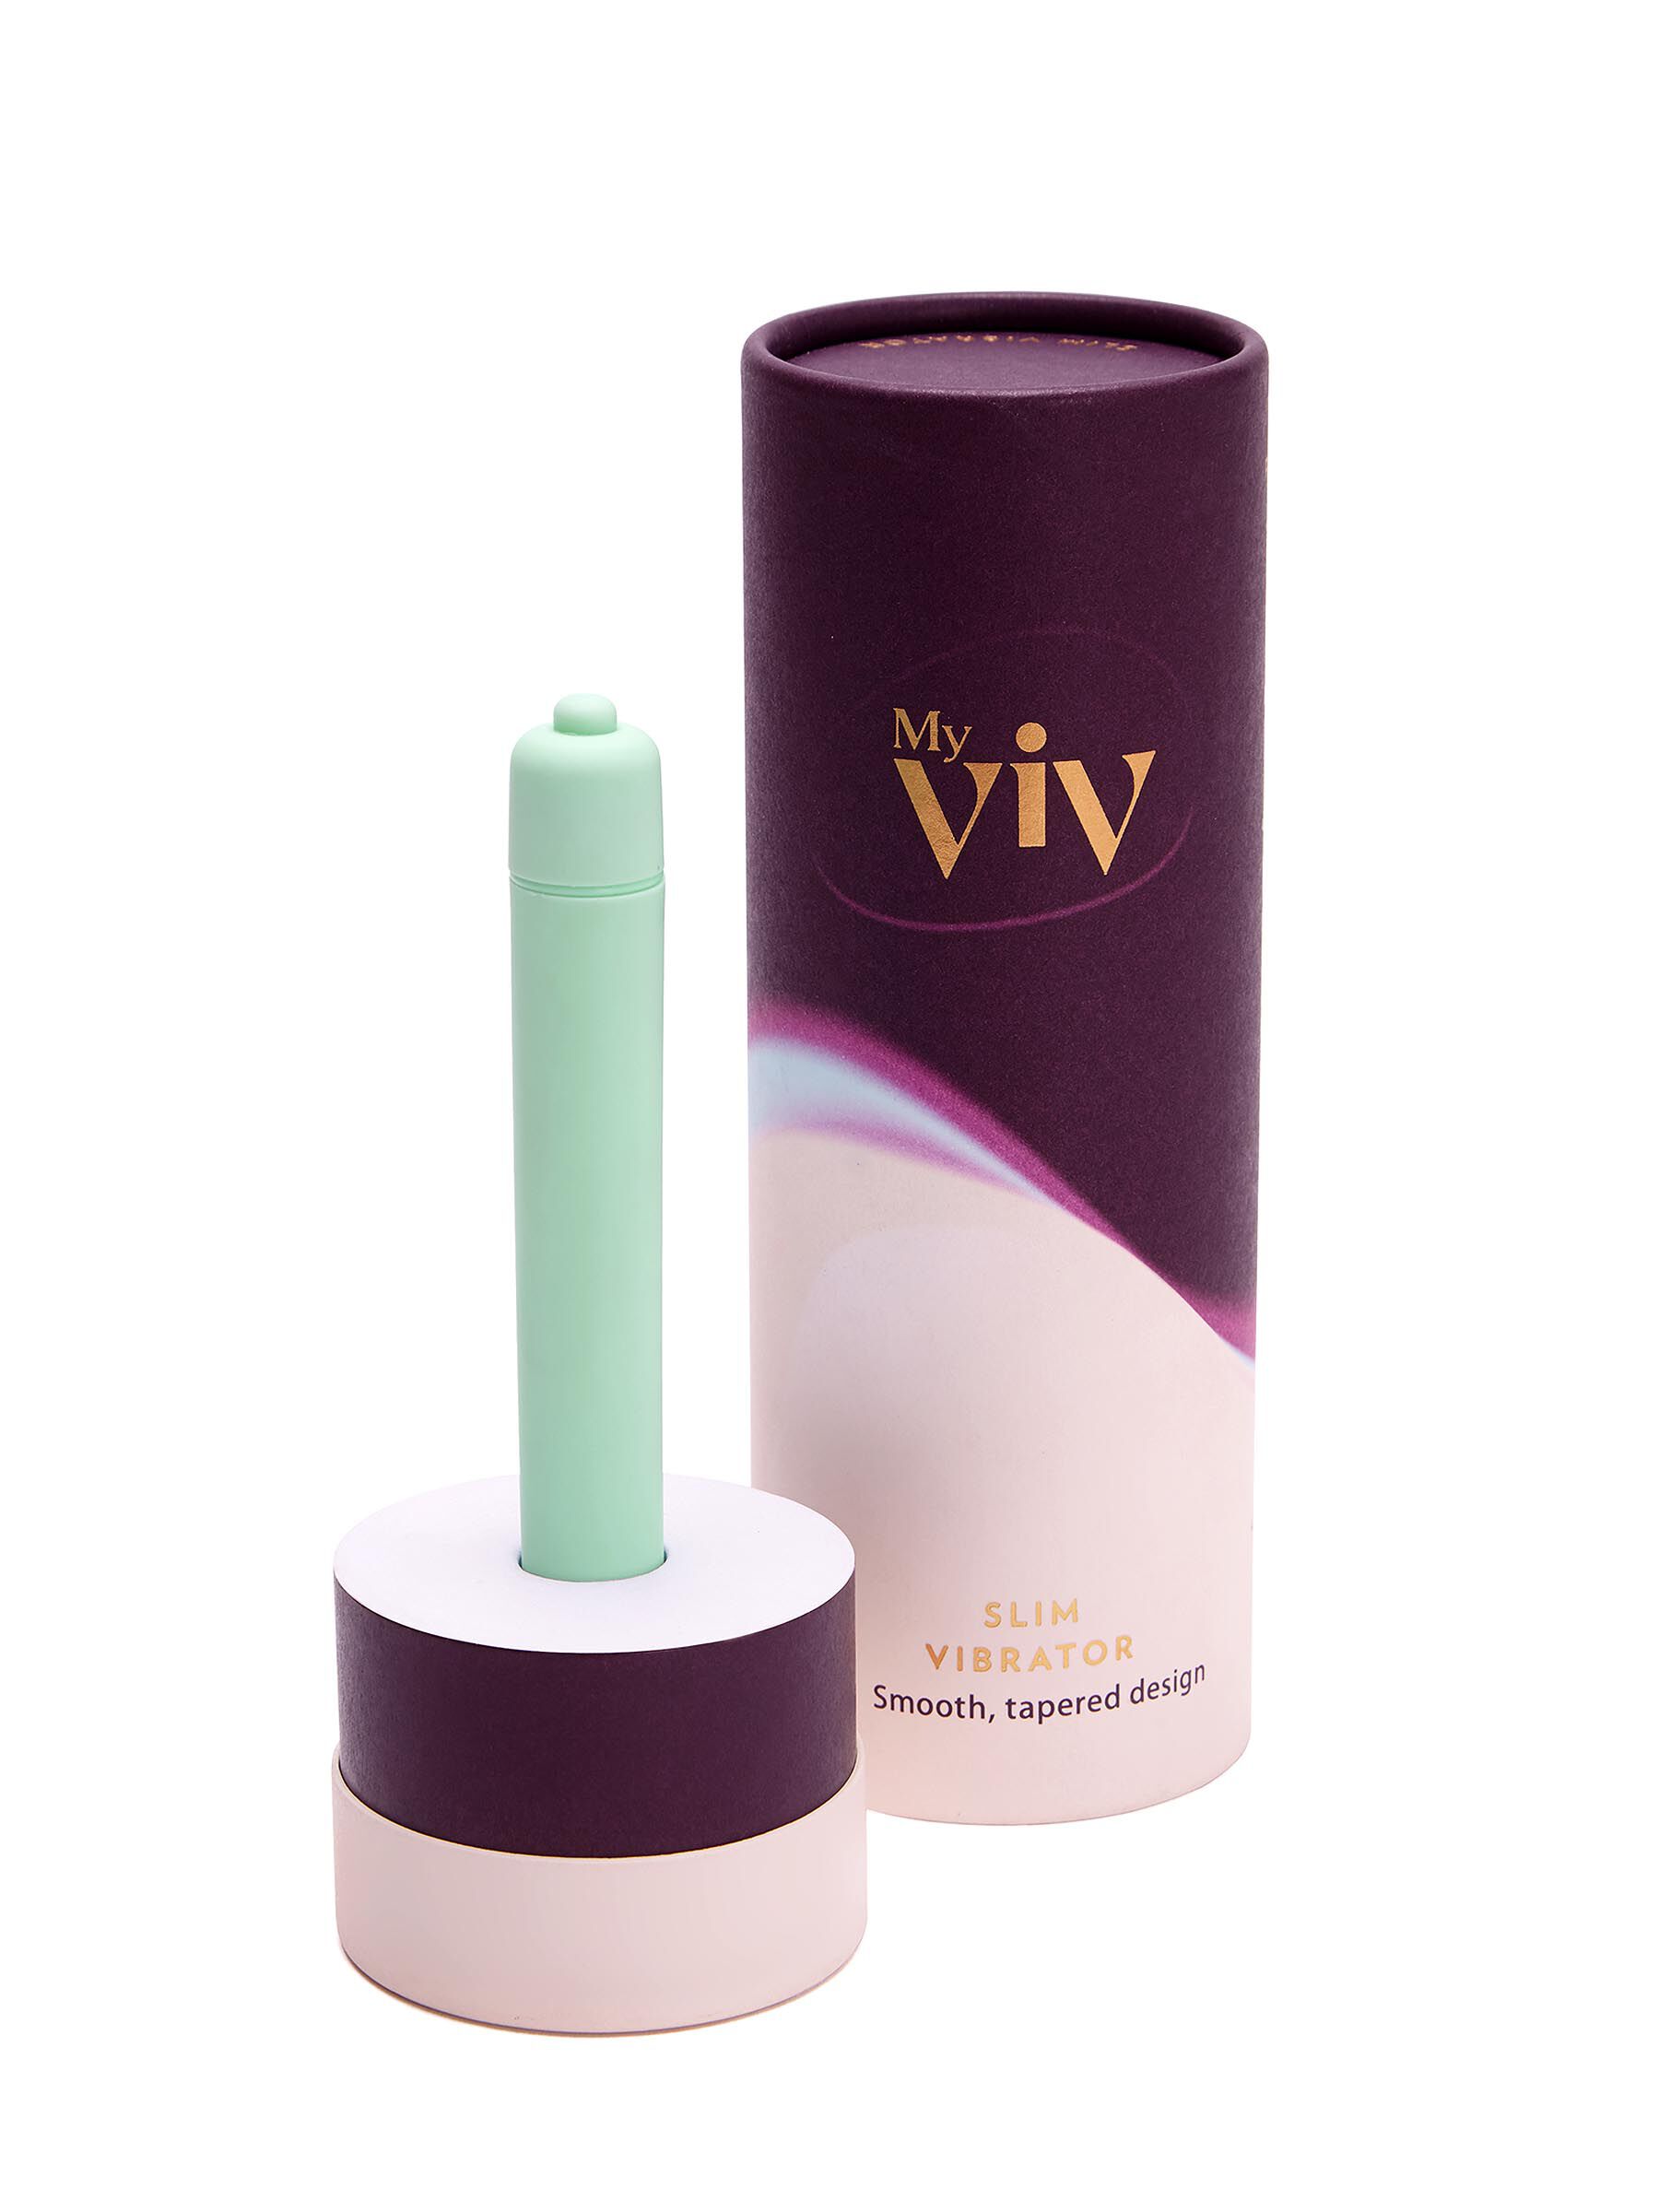 Designed for internal stimulation, this 5'' My Viv Slim Vibrator has three speed settings and seven pulse patterns for you to explore, so you can find what works best for you. You can also use it externally to target other erogenous zones, like the nipples or clitoris. Use with our My Viv lubricants, alone or with your partner.